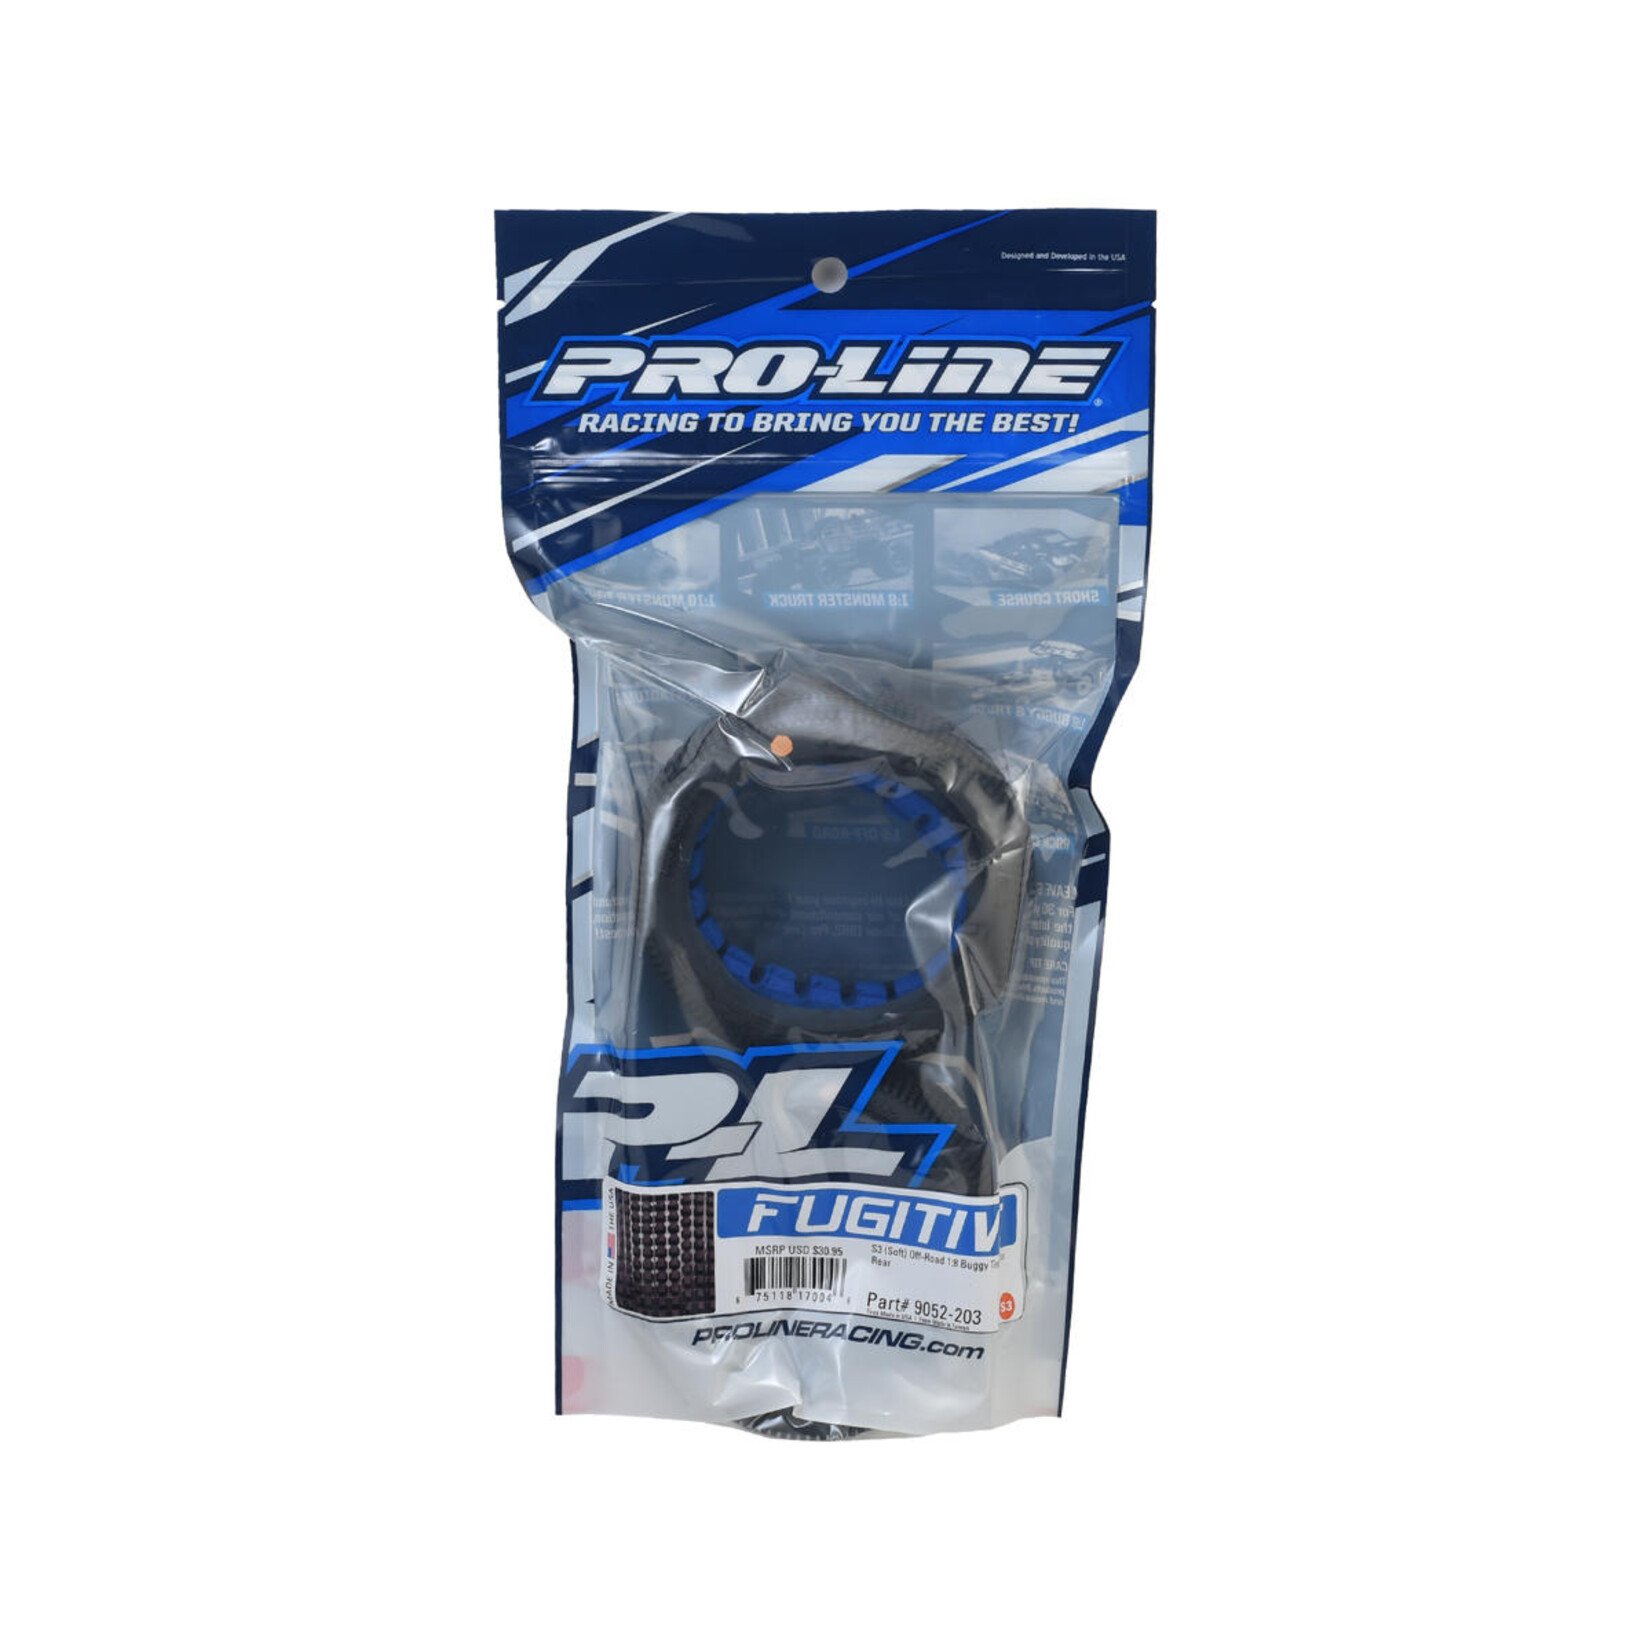 Pro-Line Pro-Line Fugitive 1/8 Buggy Tires w/Closed Cell Inserts (2) (S3) #PRO9052203